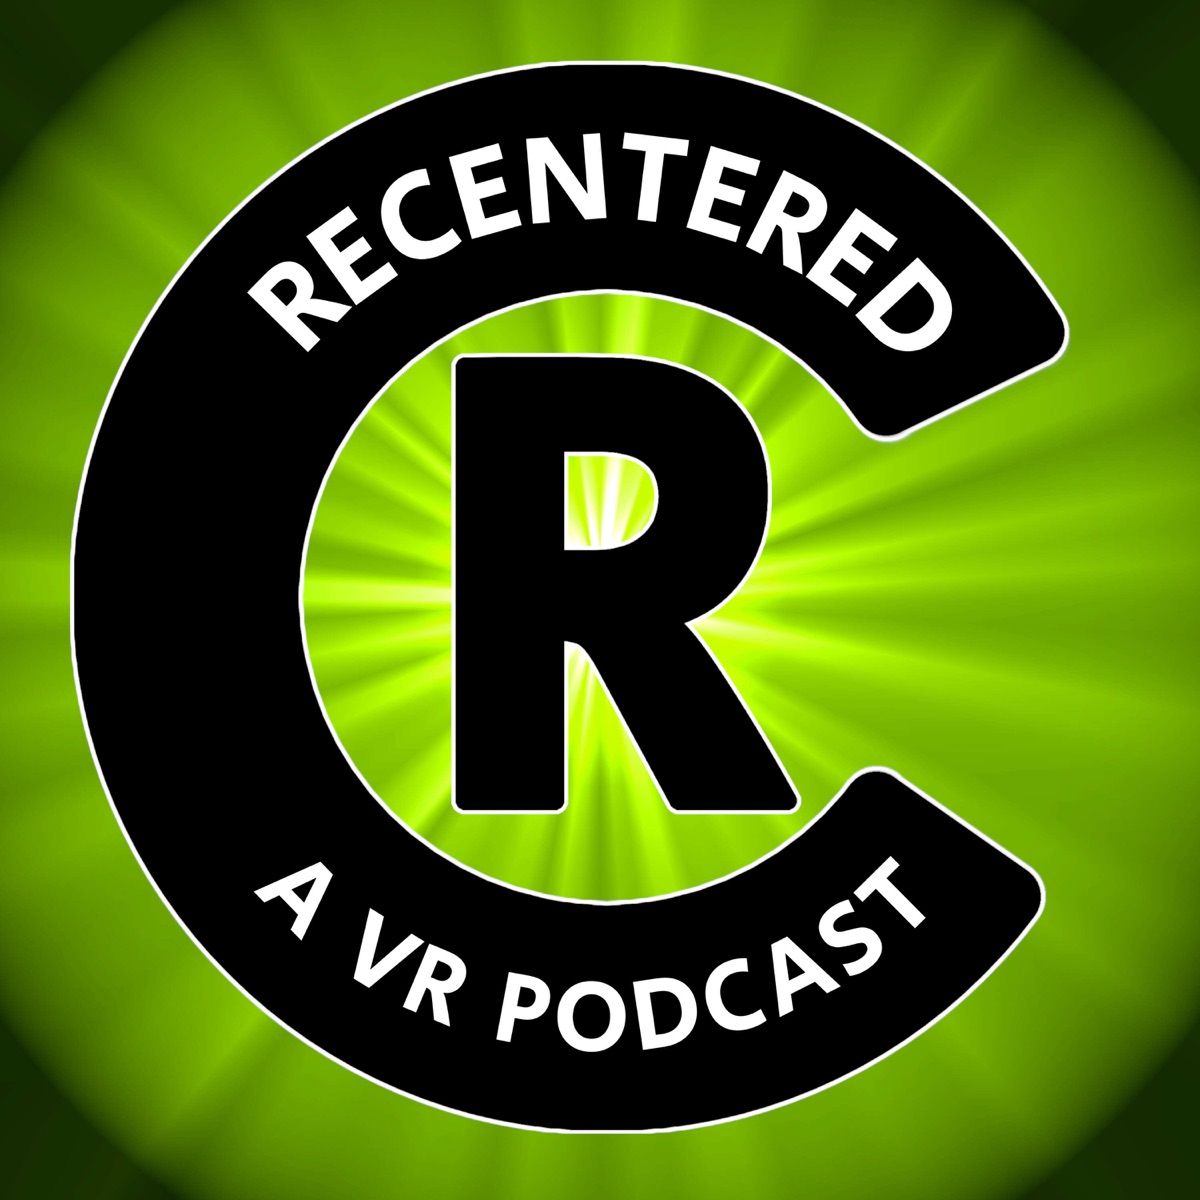 Listen to RECENTERED - A VR Podcast podcast